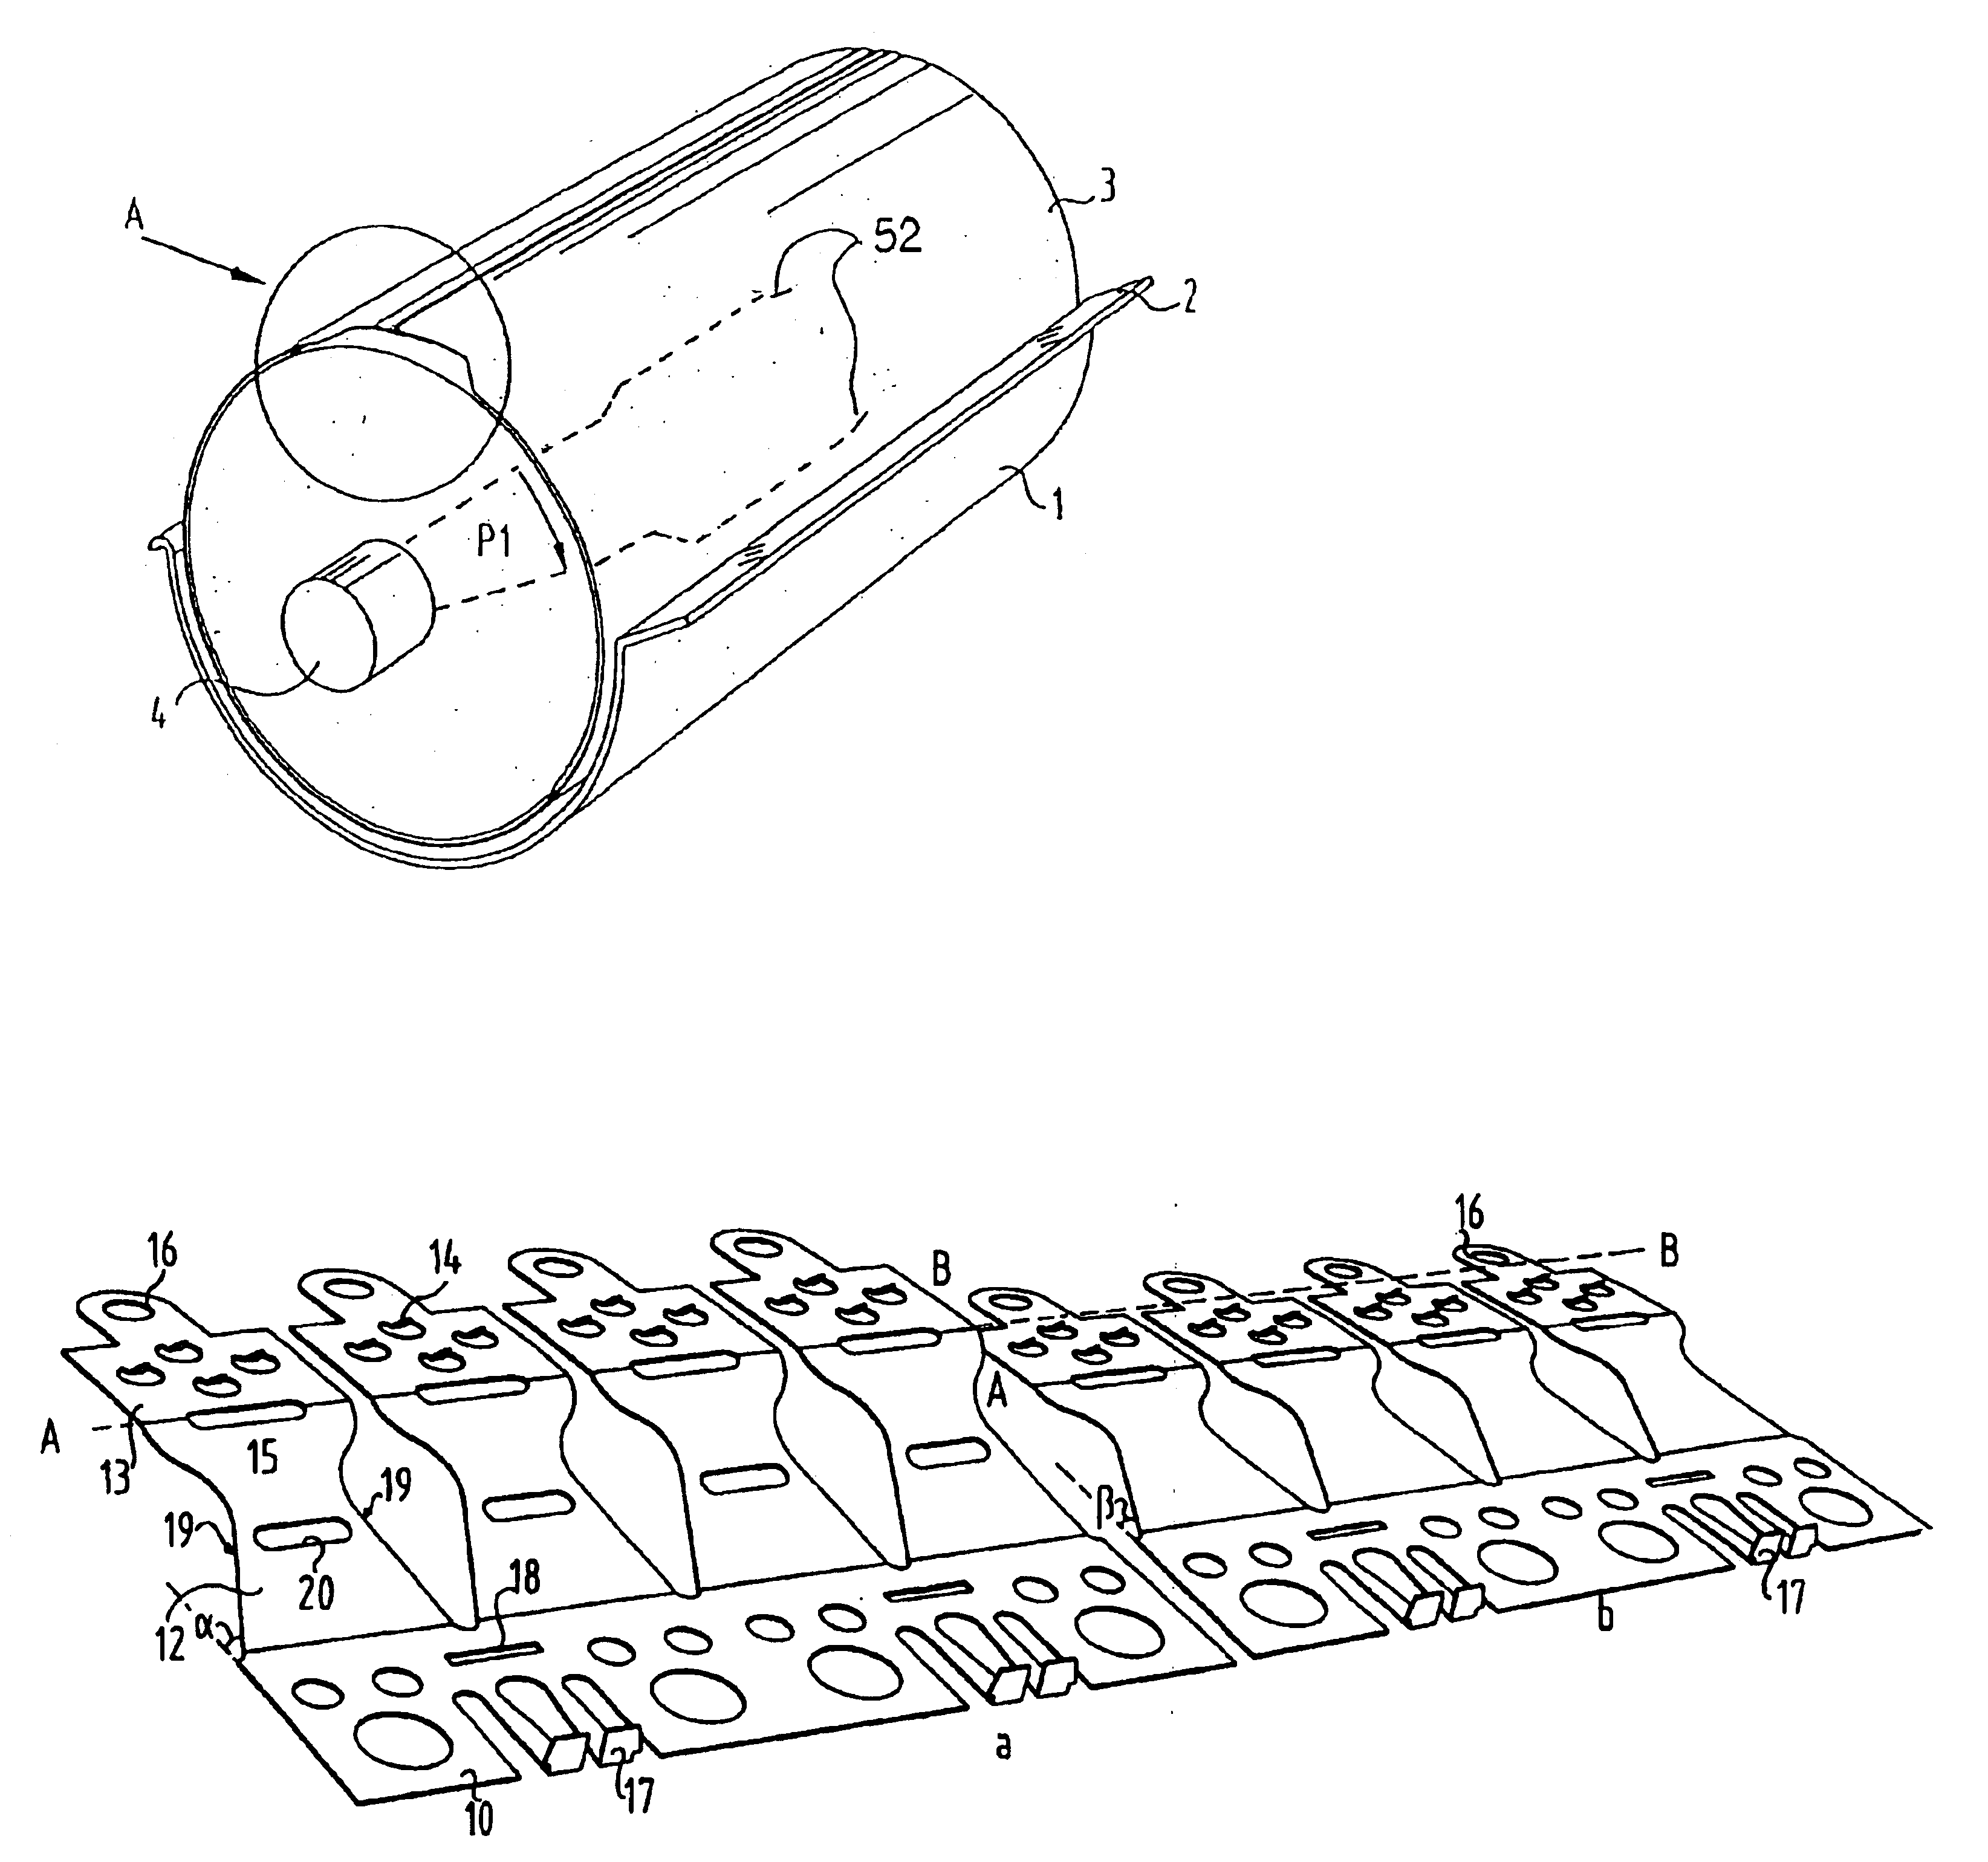 Device for ironing laundry and resilient element therefor